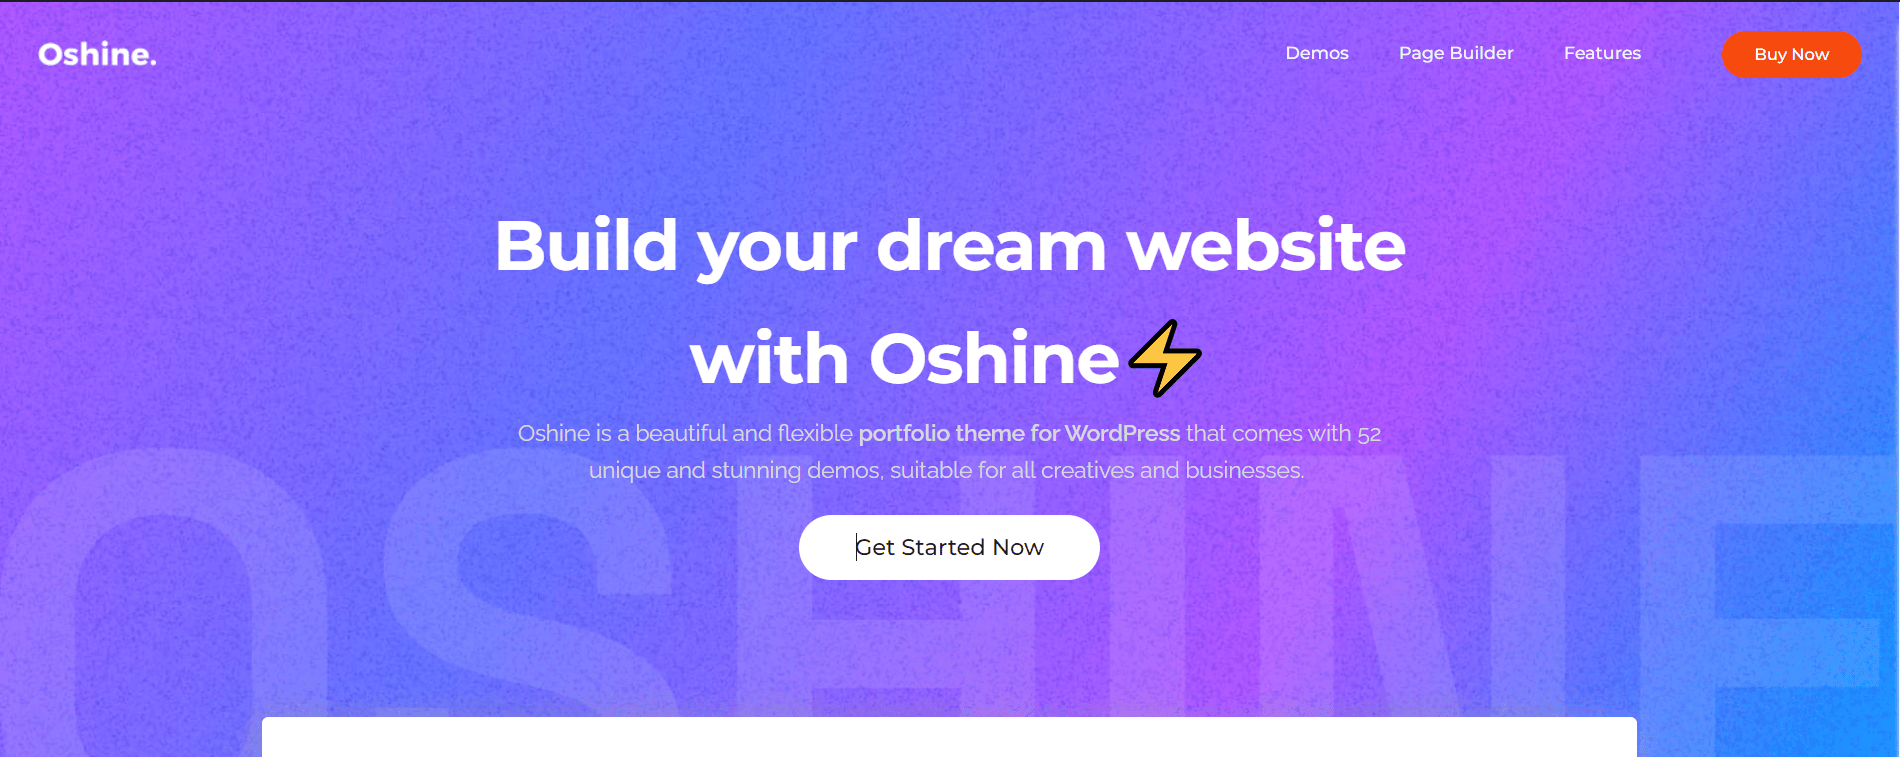 Oshine theme's homepage with a vibrant purple and blue gradient background, advertising as a beautiful and flexible portfolio theme for WordPress.